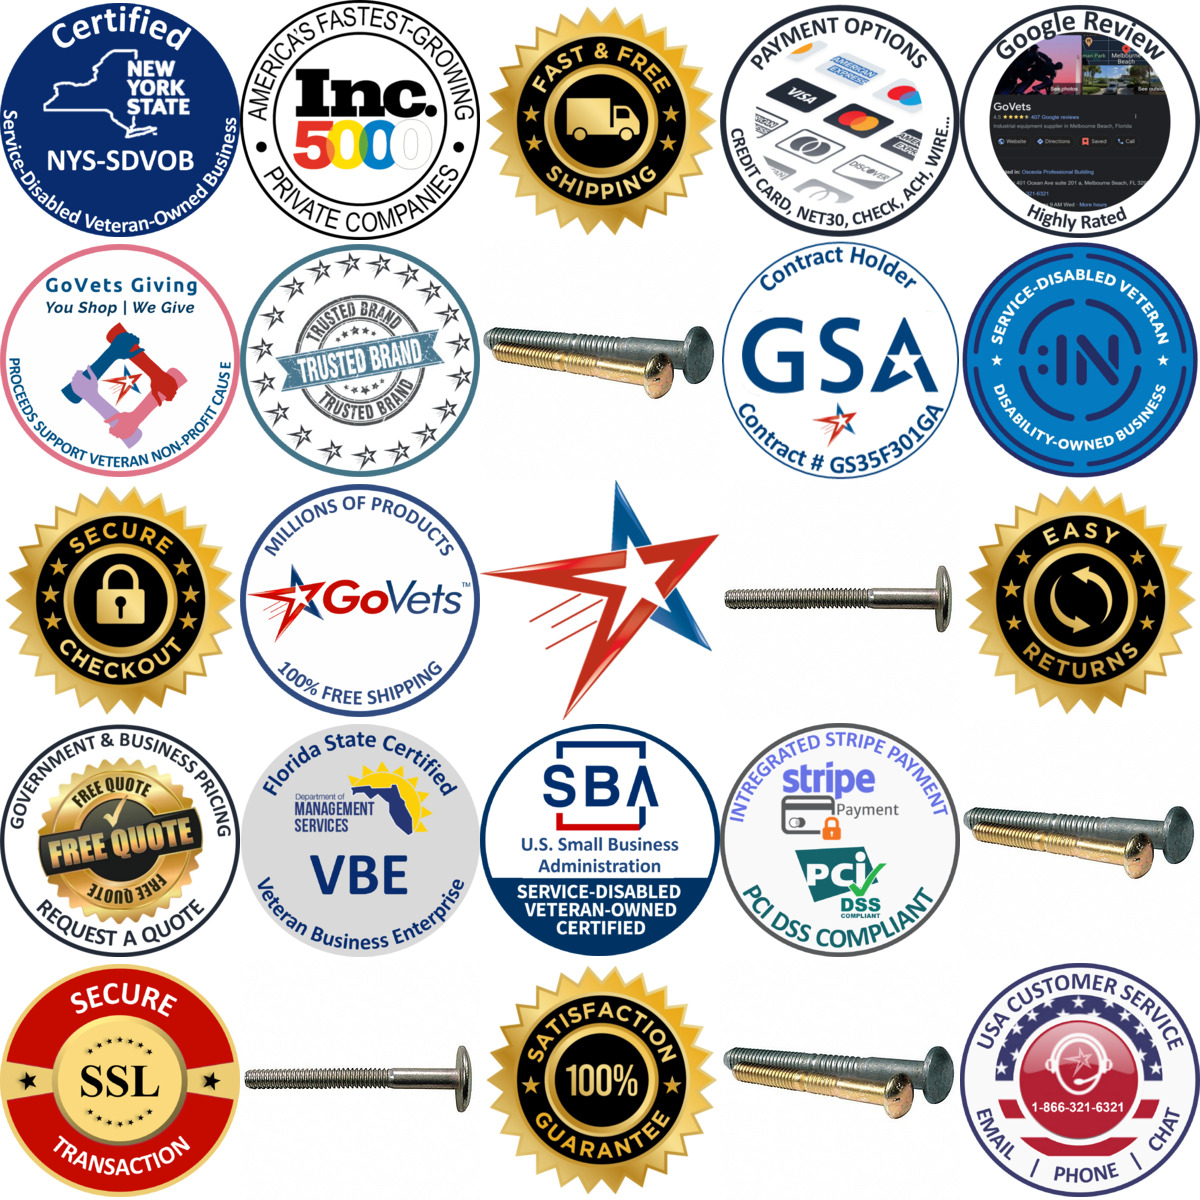 A selection of Lock Bolts products on GoVets